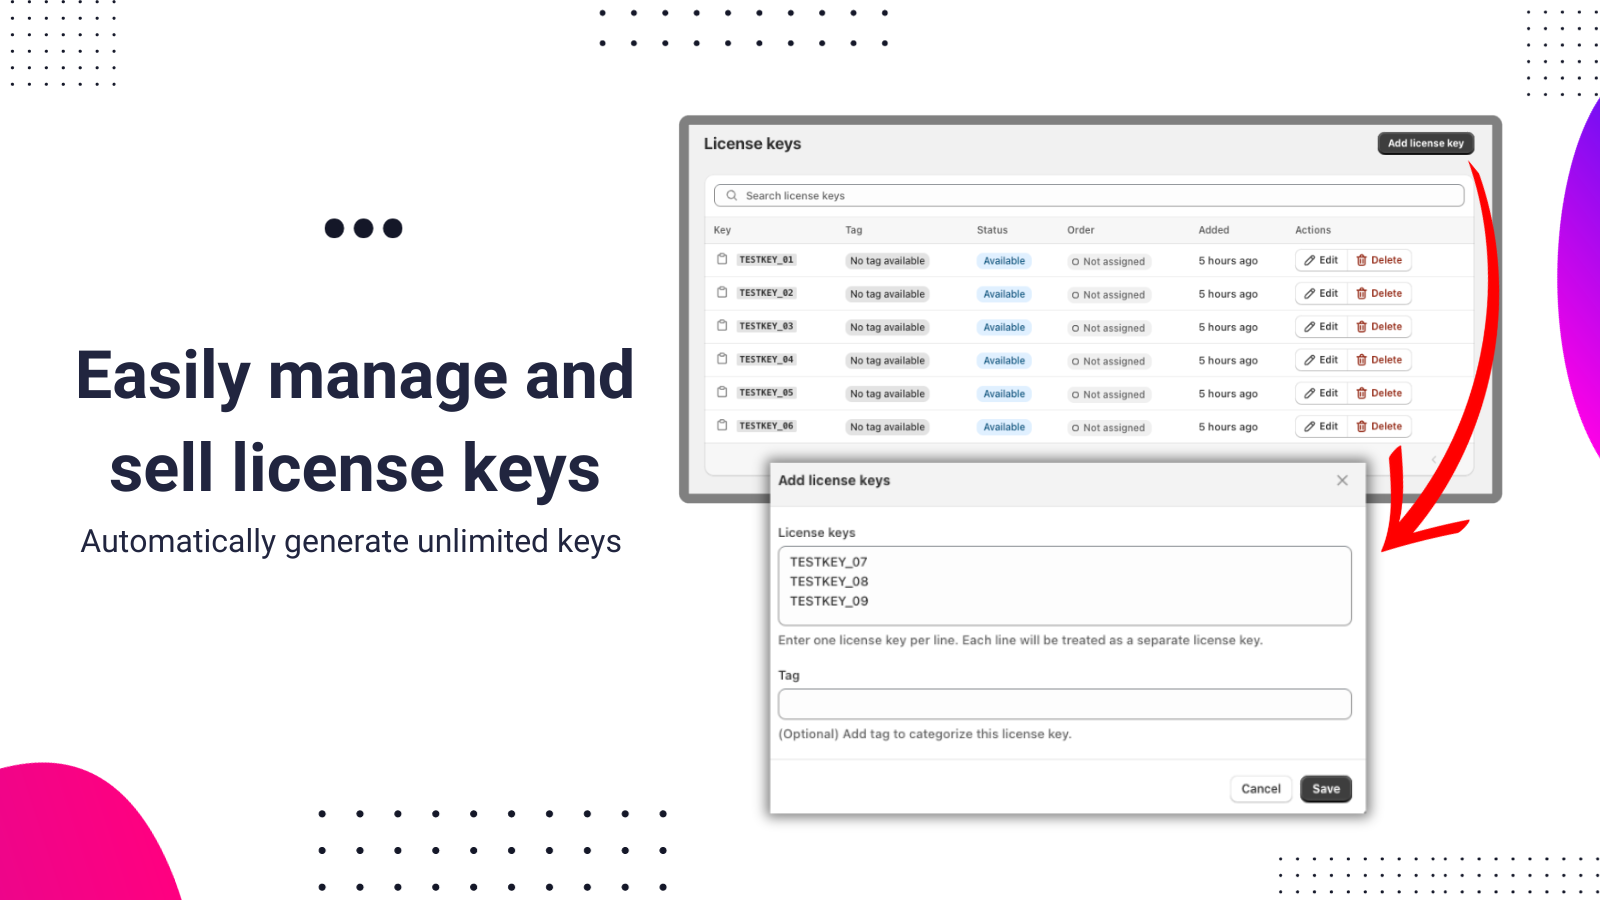 Easily manage and sell license keys